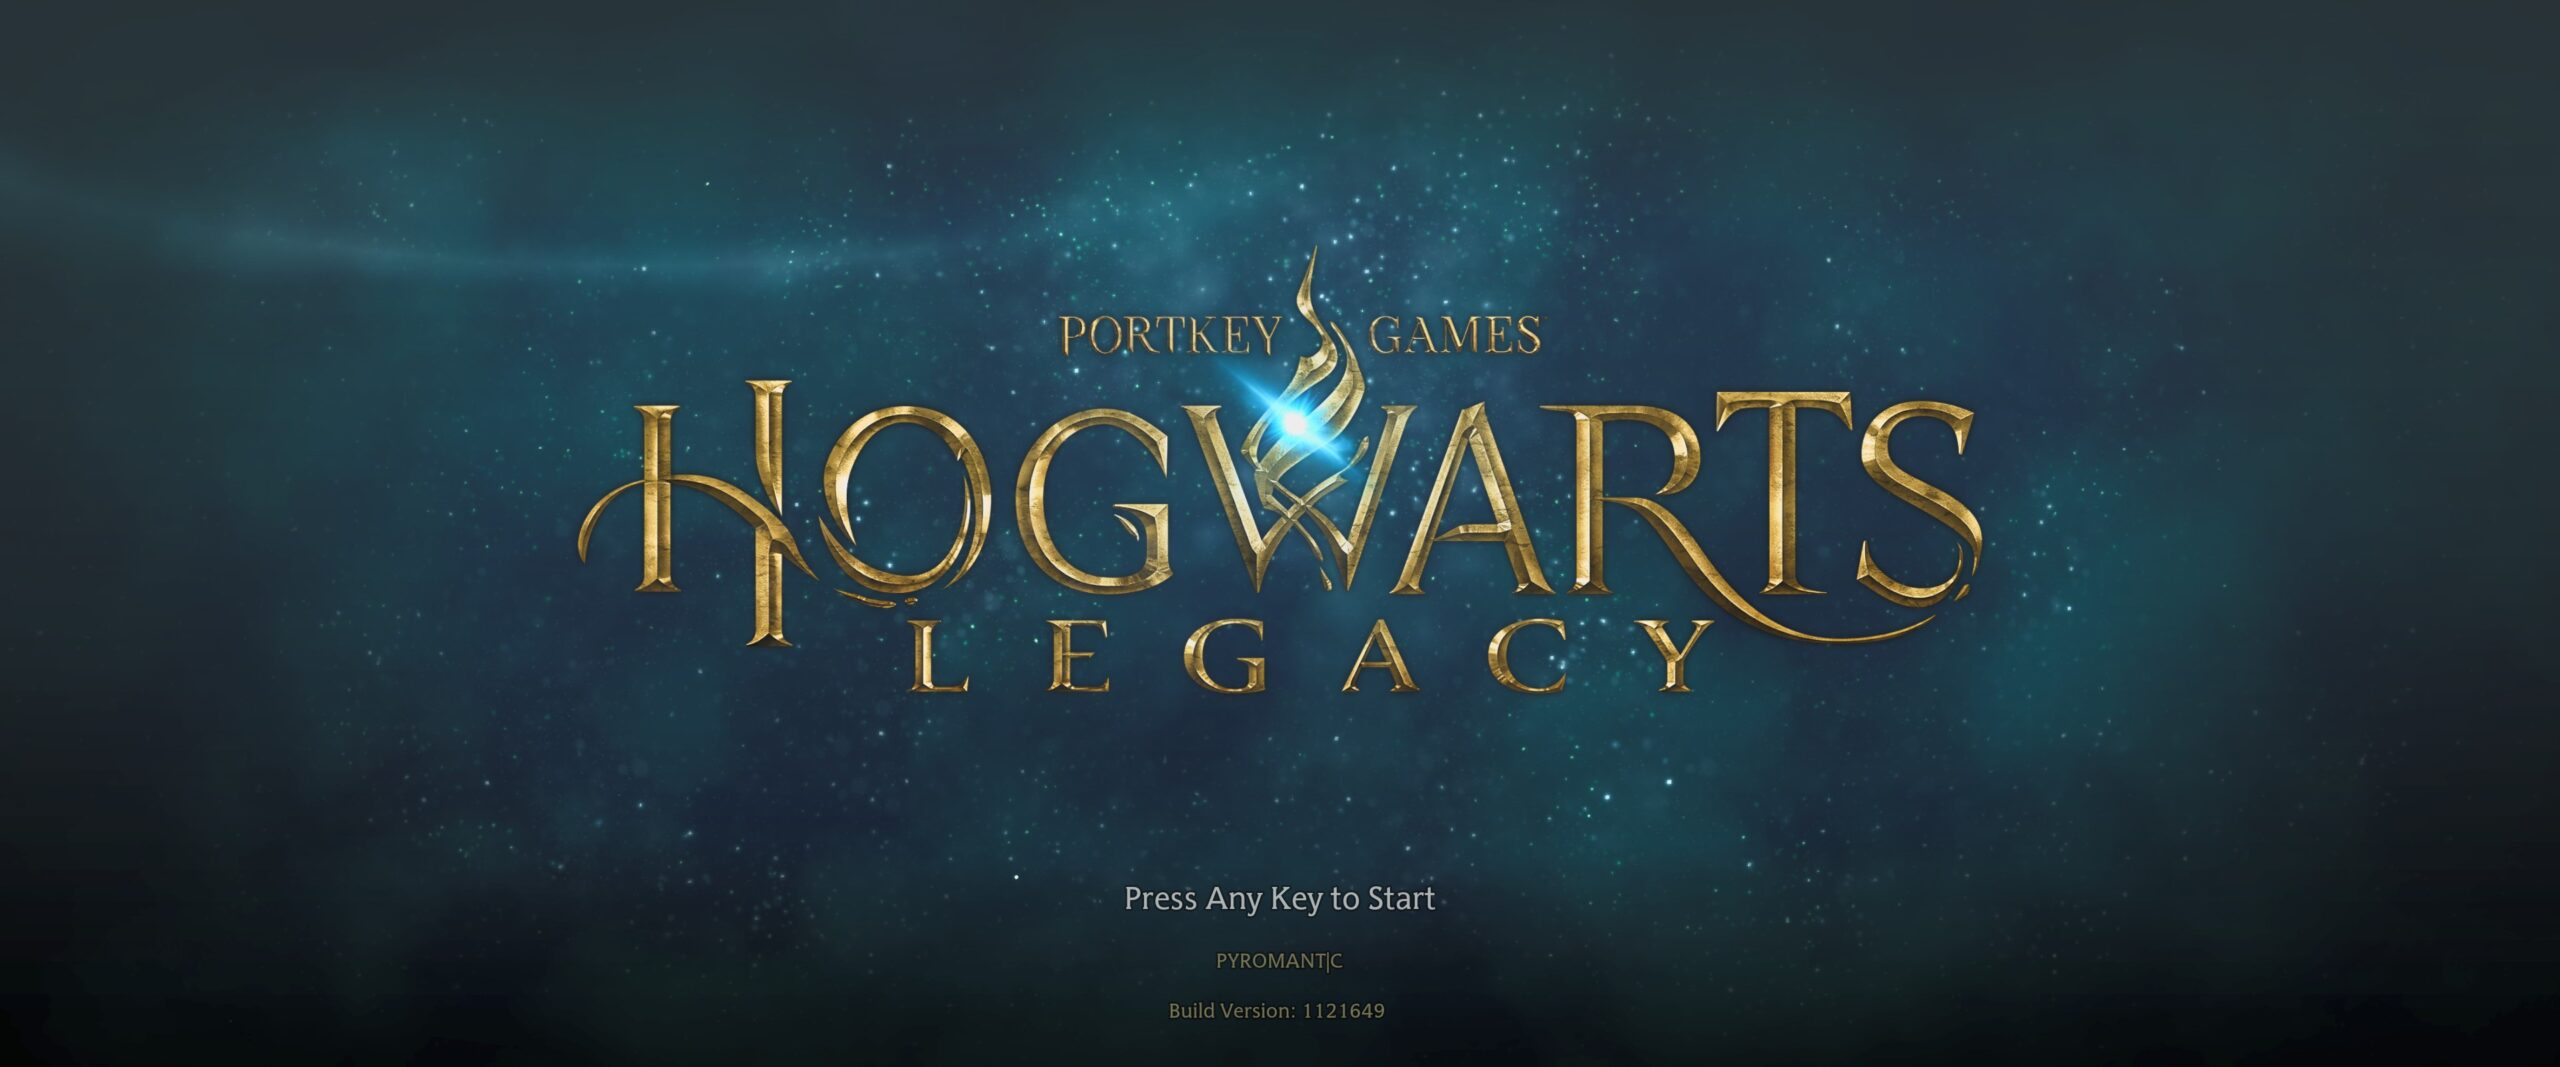 Hogwarts Legacy: Generational Conflict. – The Refined Geek